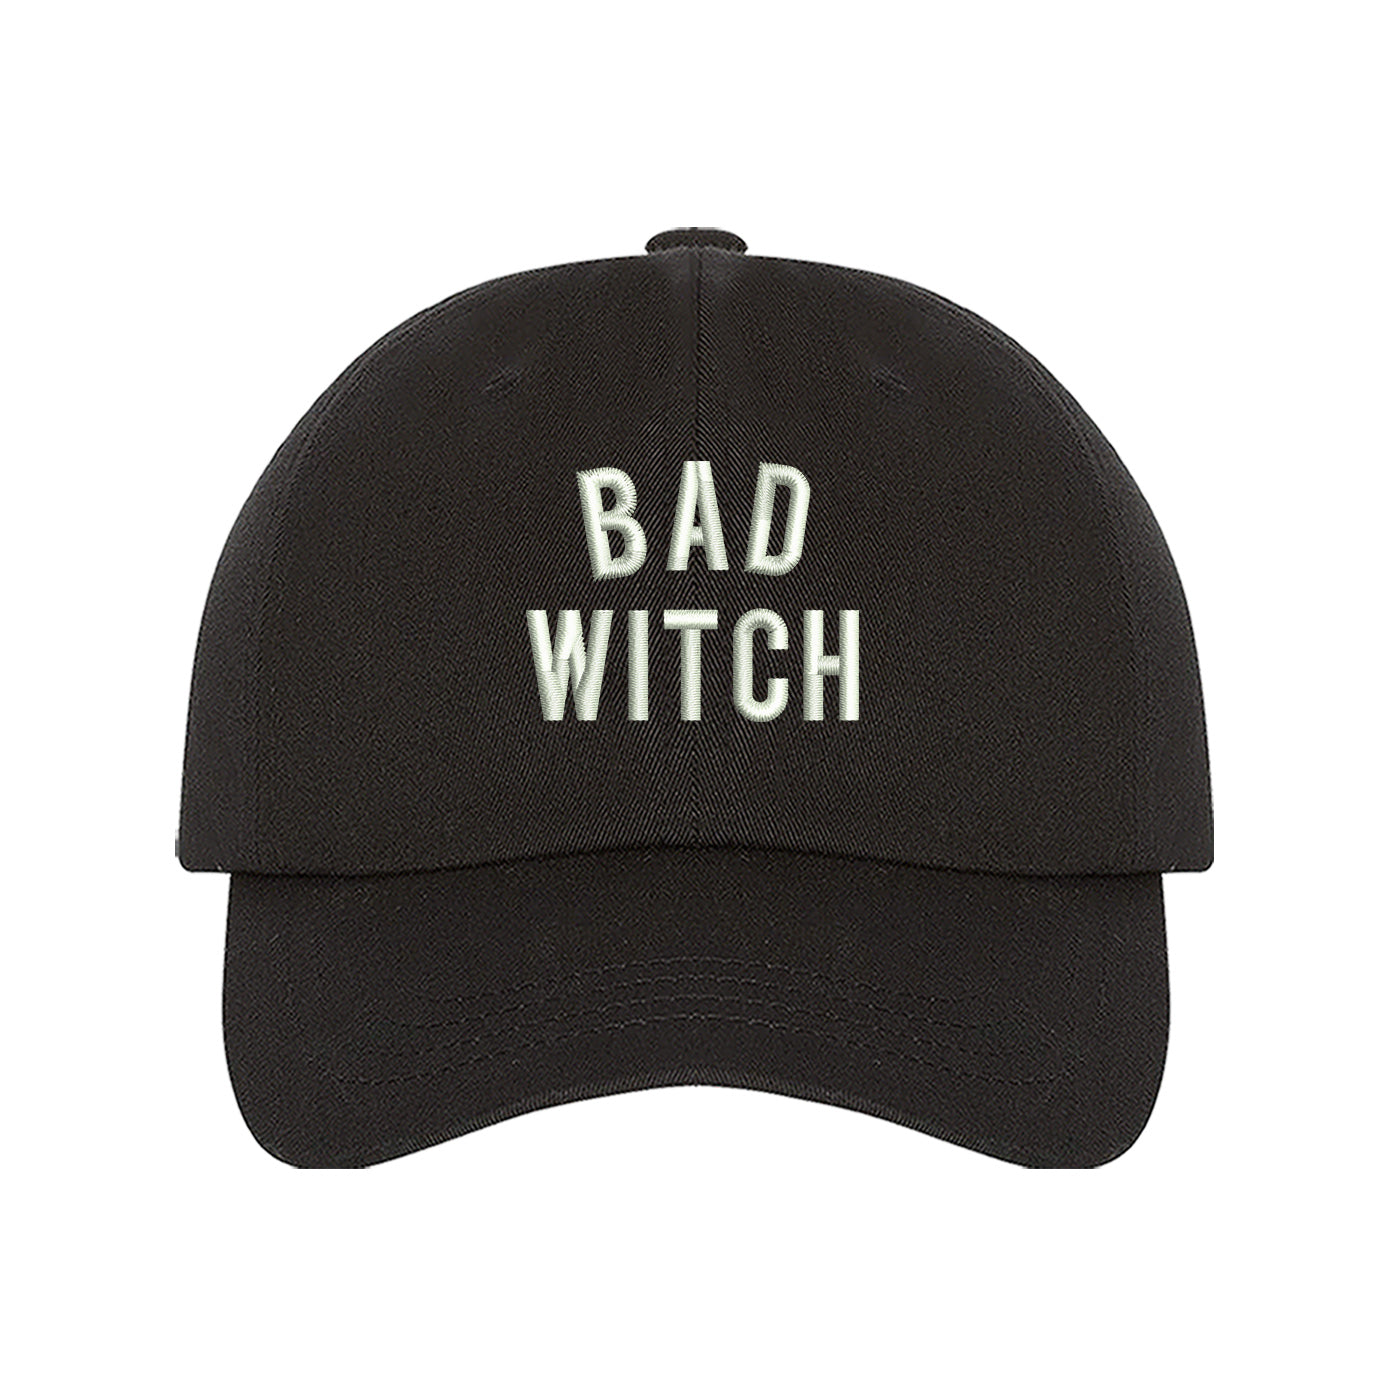 Unisex Bad Witch Dad Hat, Baseball Hat, Bad Witch Hats, Witch, Embroidered Hat, Embroidered Bad Witch, Custom Embroidery, DSY Lifestyle Hats, Black Dad Hat, Made in LA